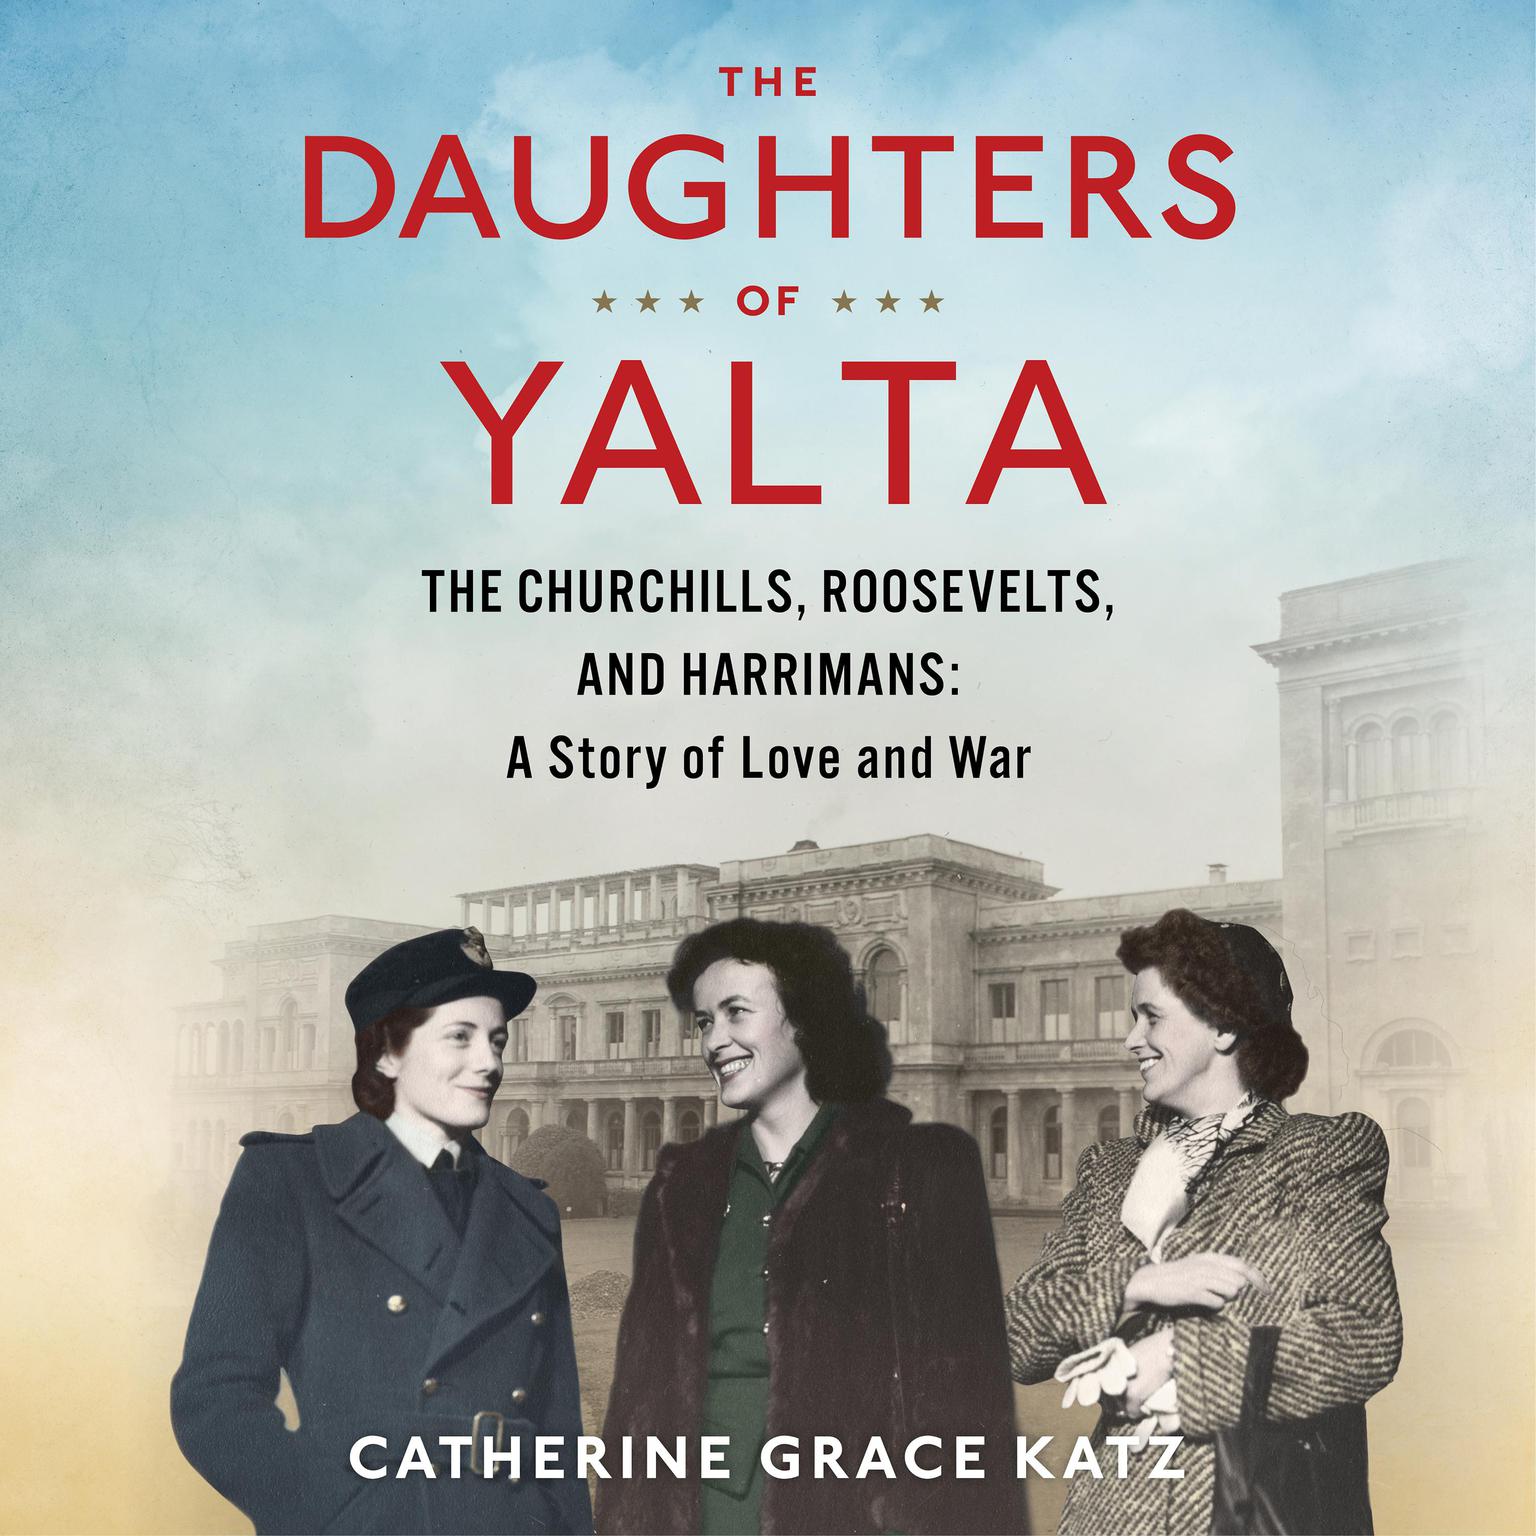 The Daughters Of Yalta: The Churchills, Roosevelts, and Harrimans: A Story of Love and War Audiobook, by Catherine Grace Katz